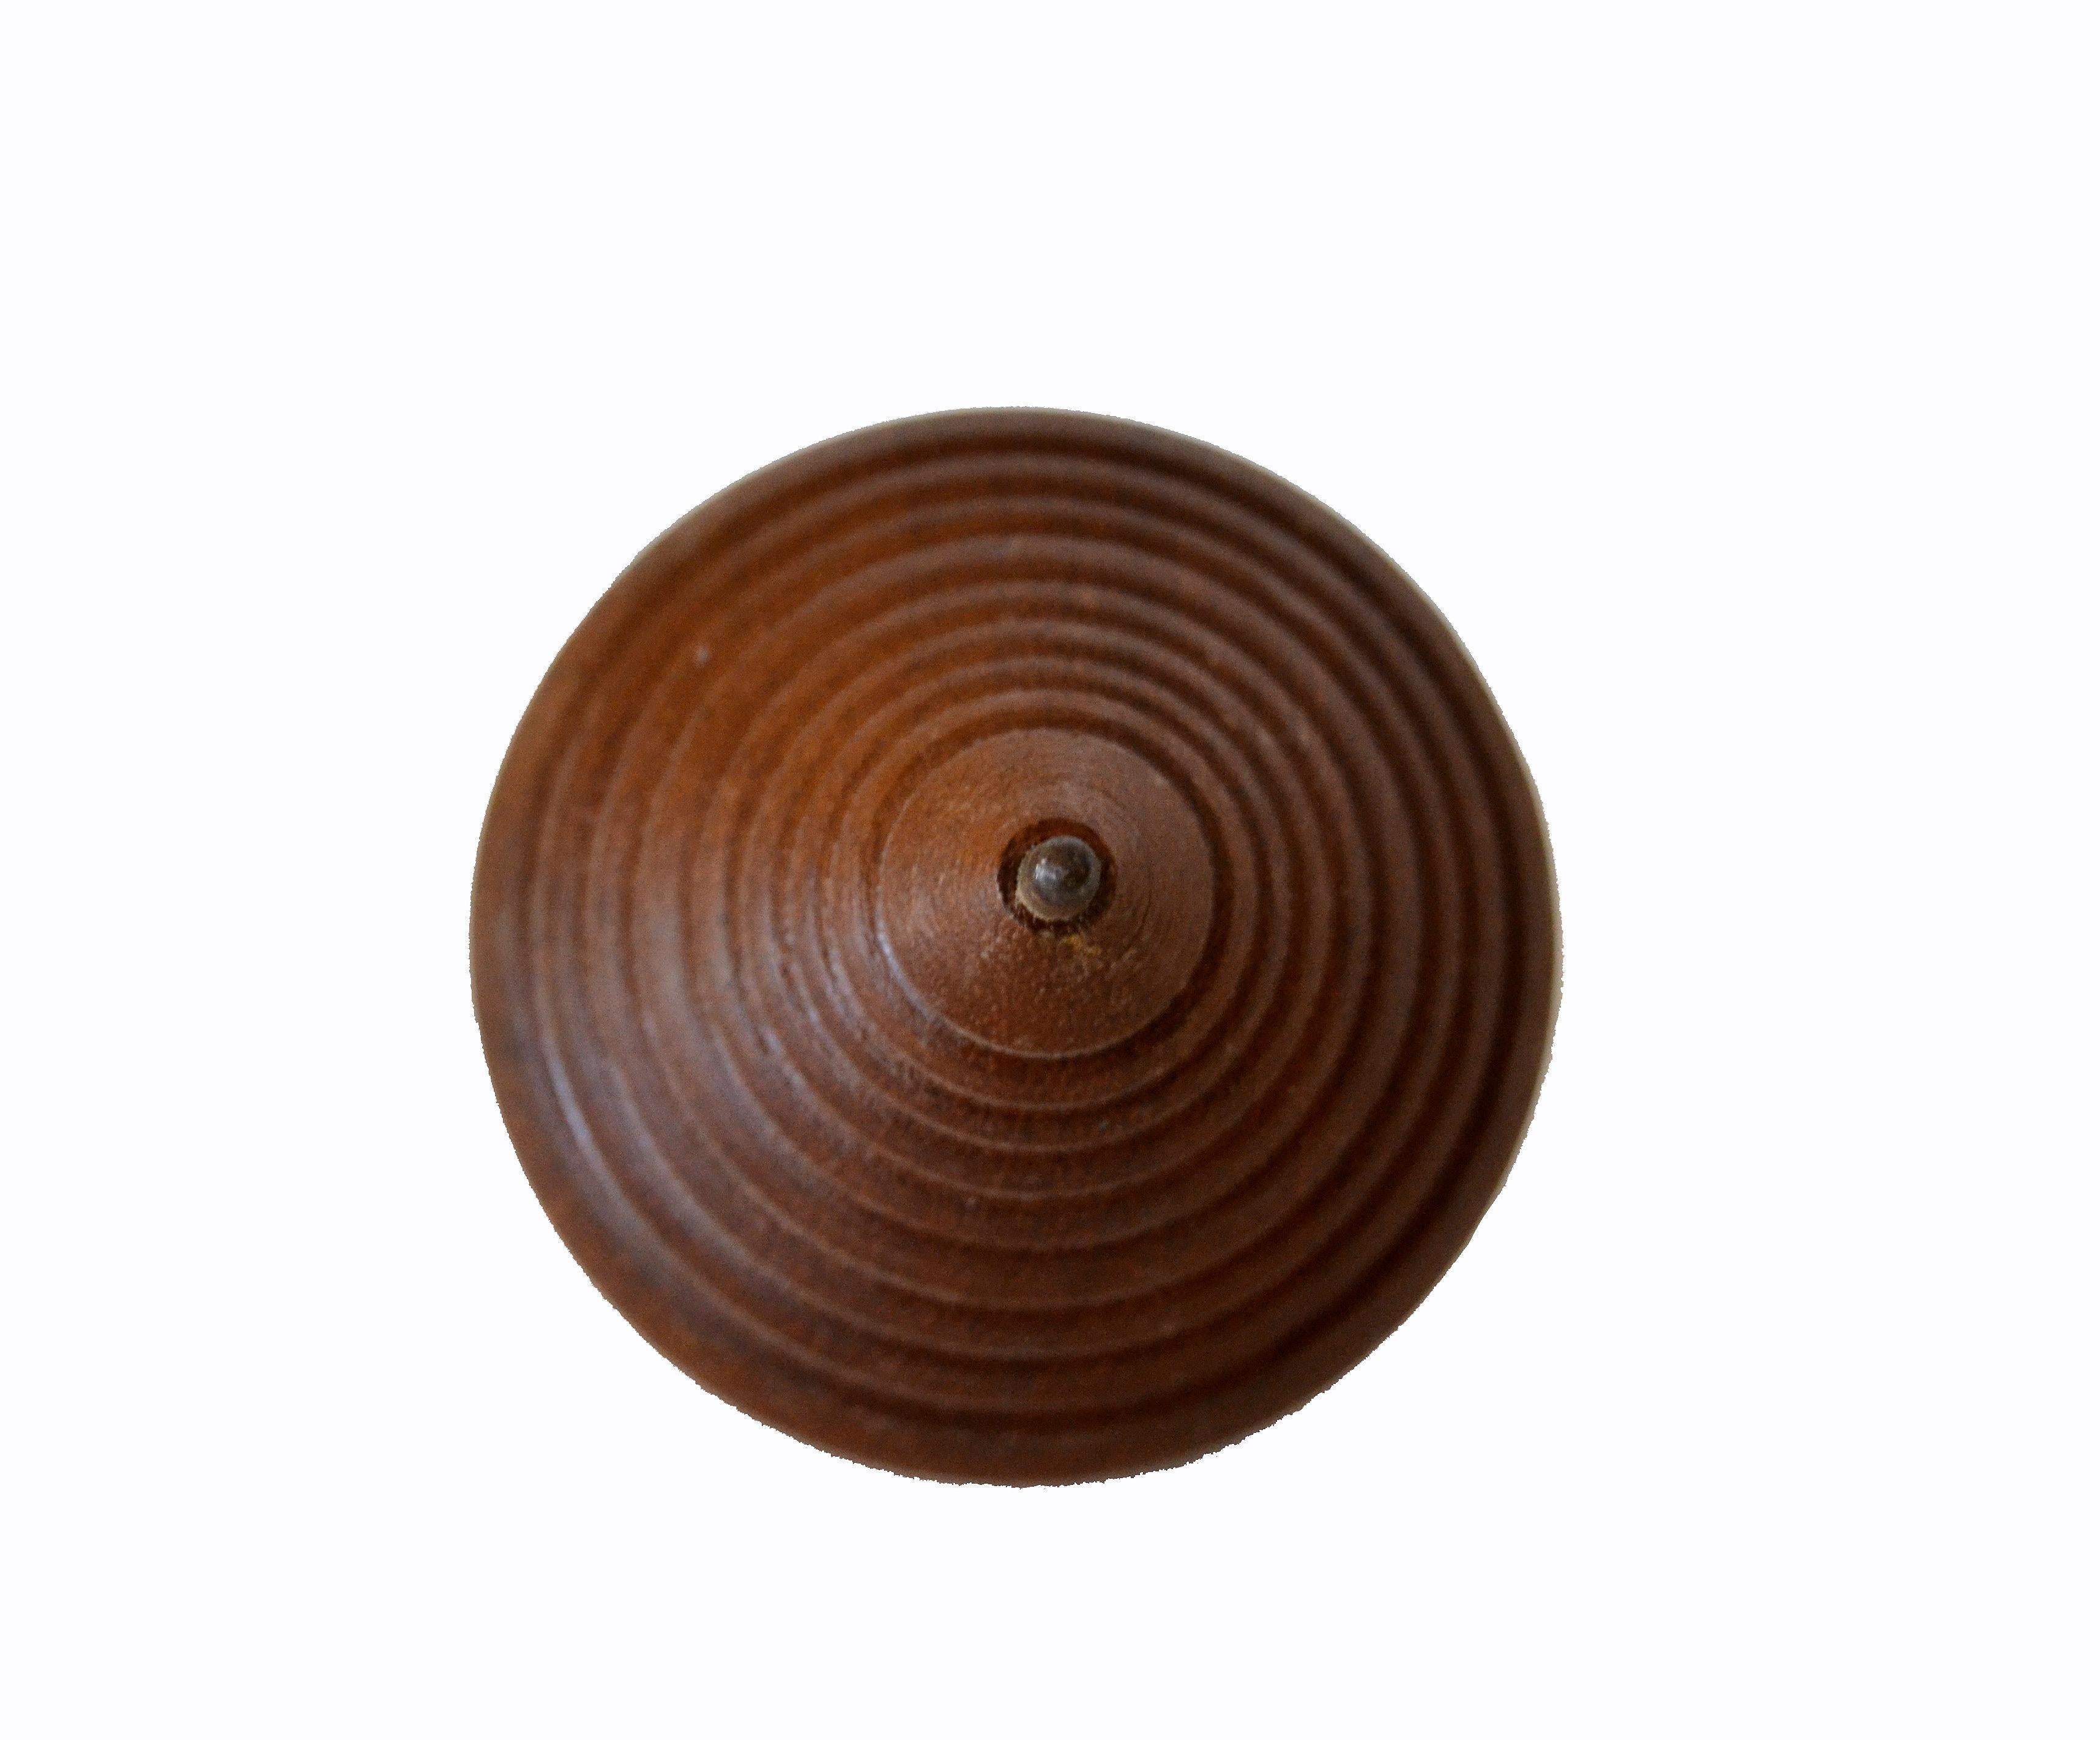 American Mid-Century Modern Woodworking Turned Walnut Wood Spinning Top Toy In Good Condition For Sale In Miami, FL